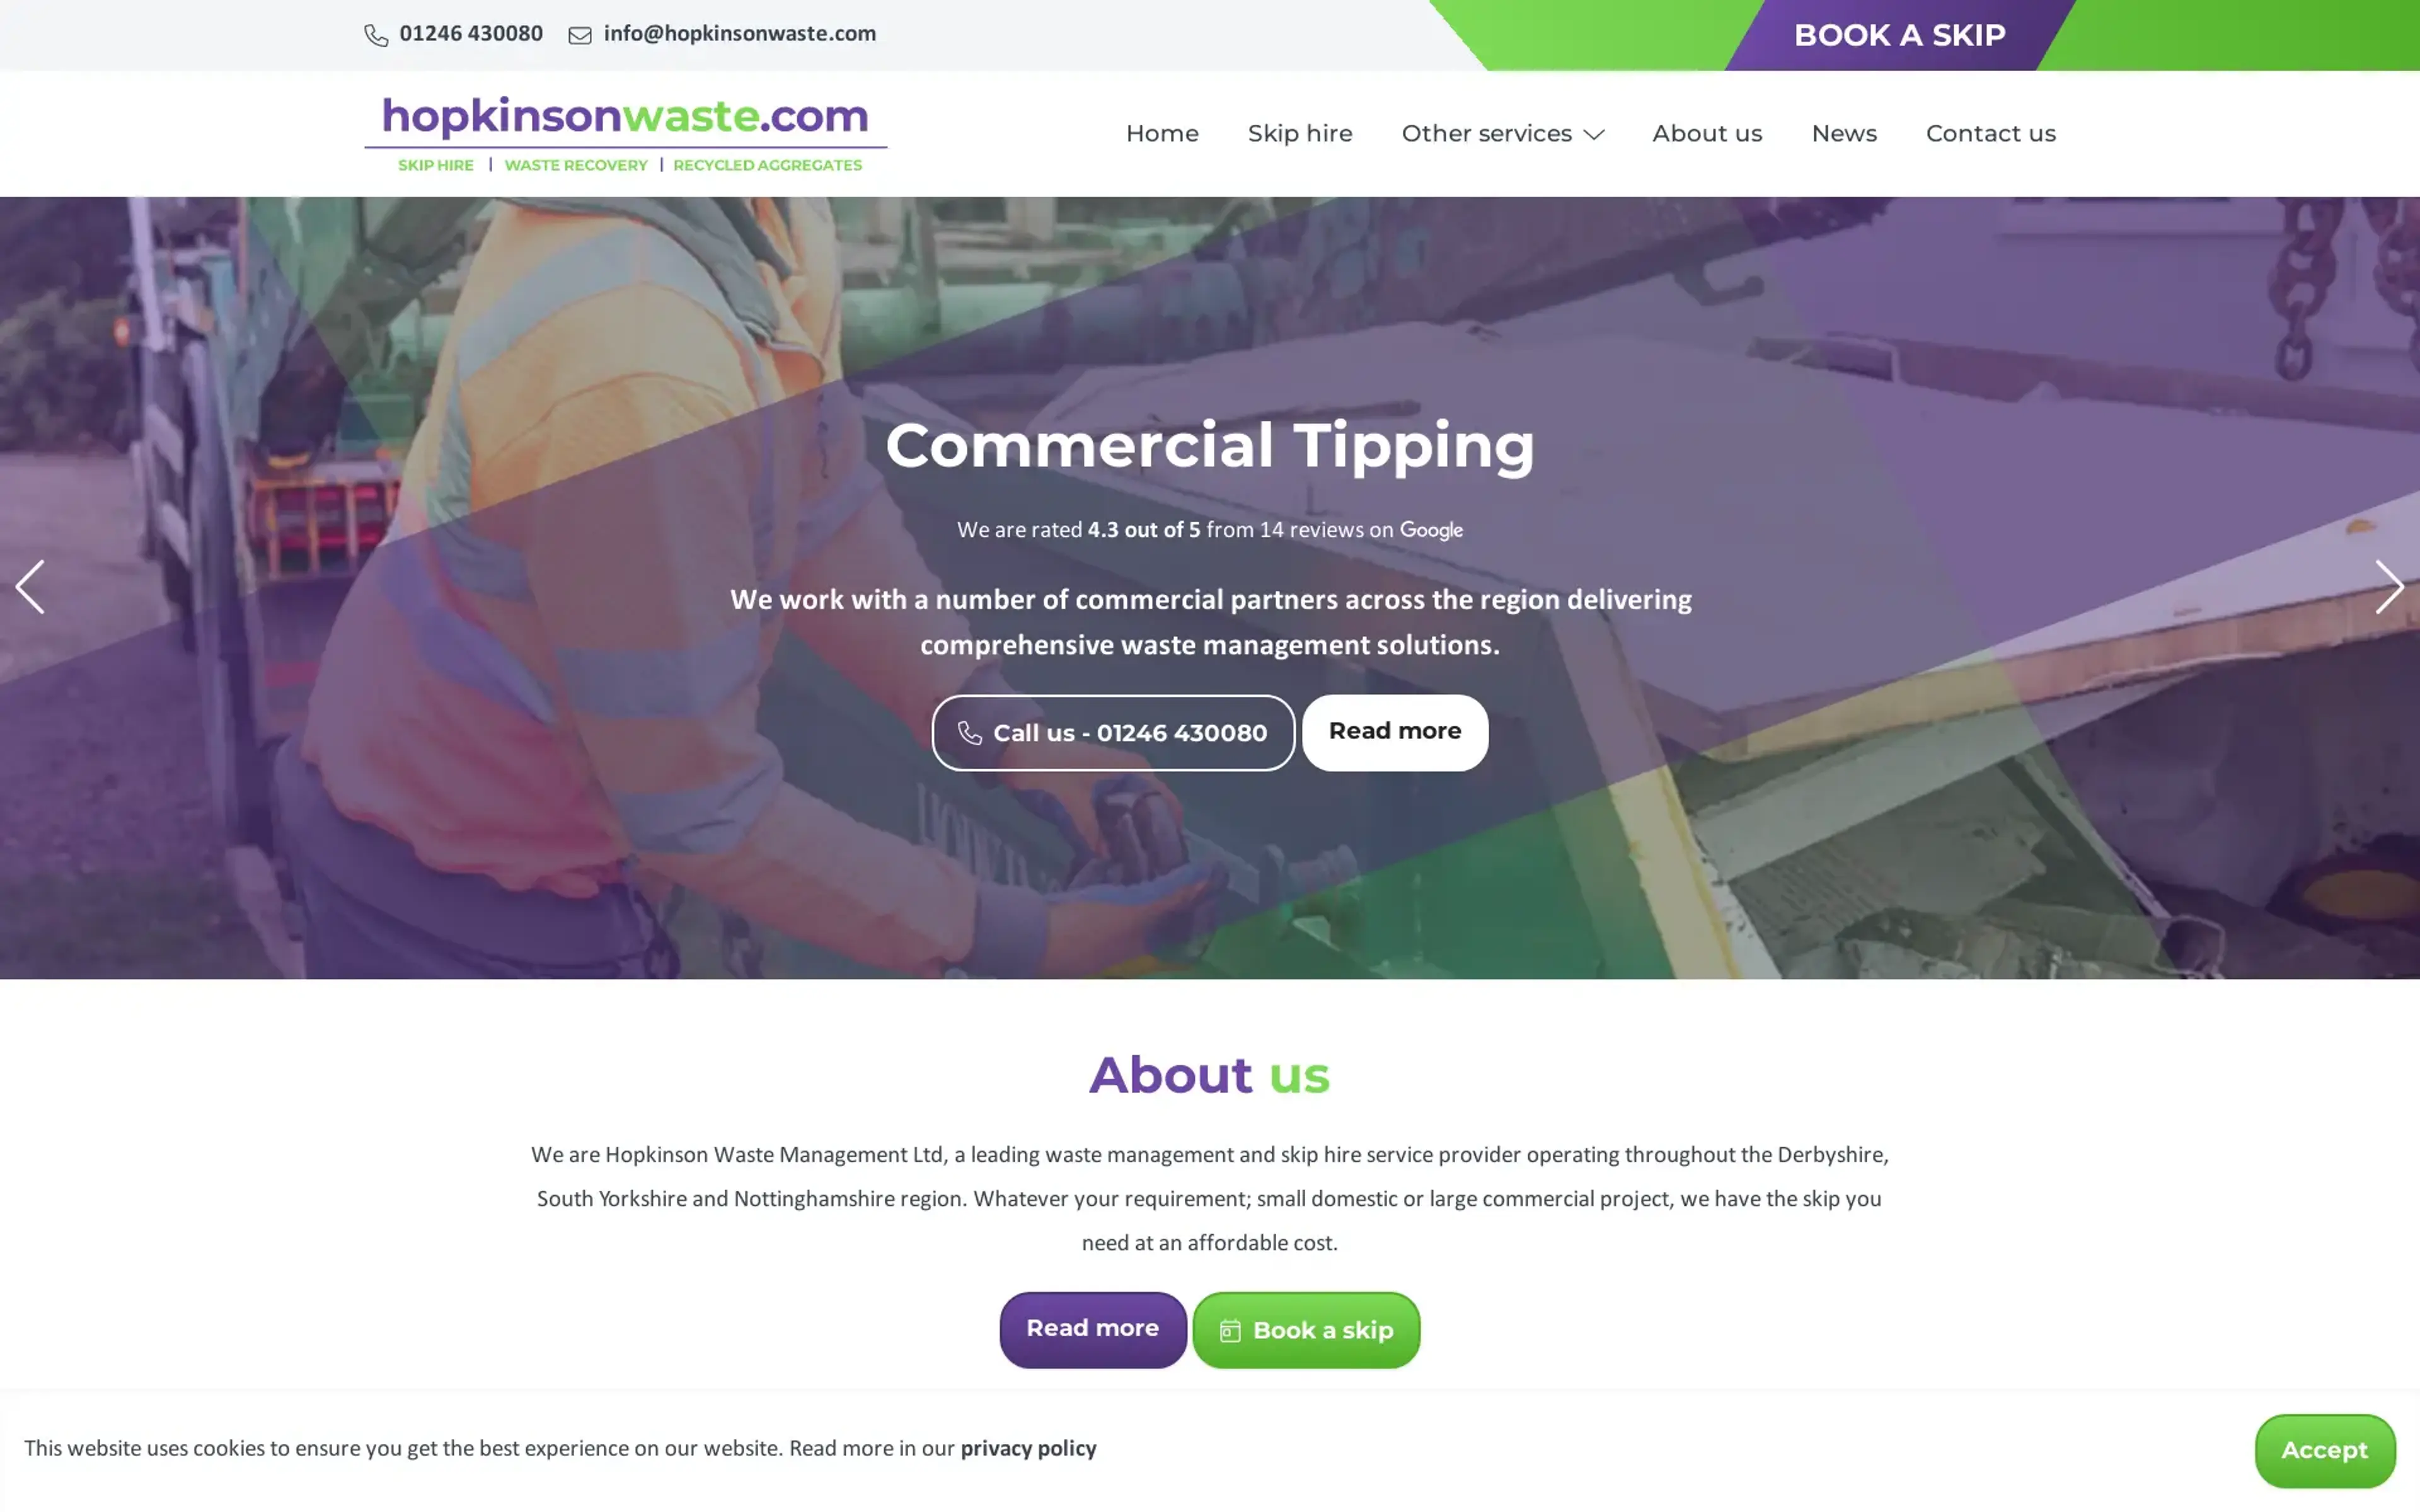 Recent project we worked on for Hopkinson Waste